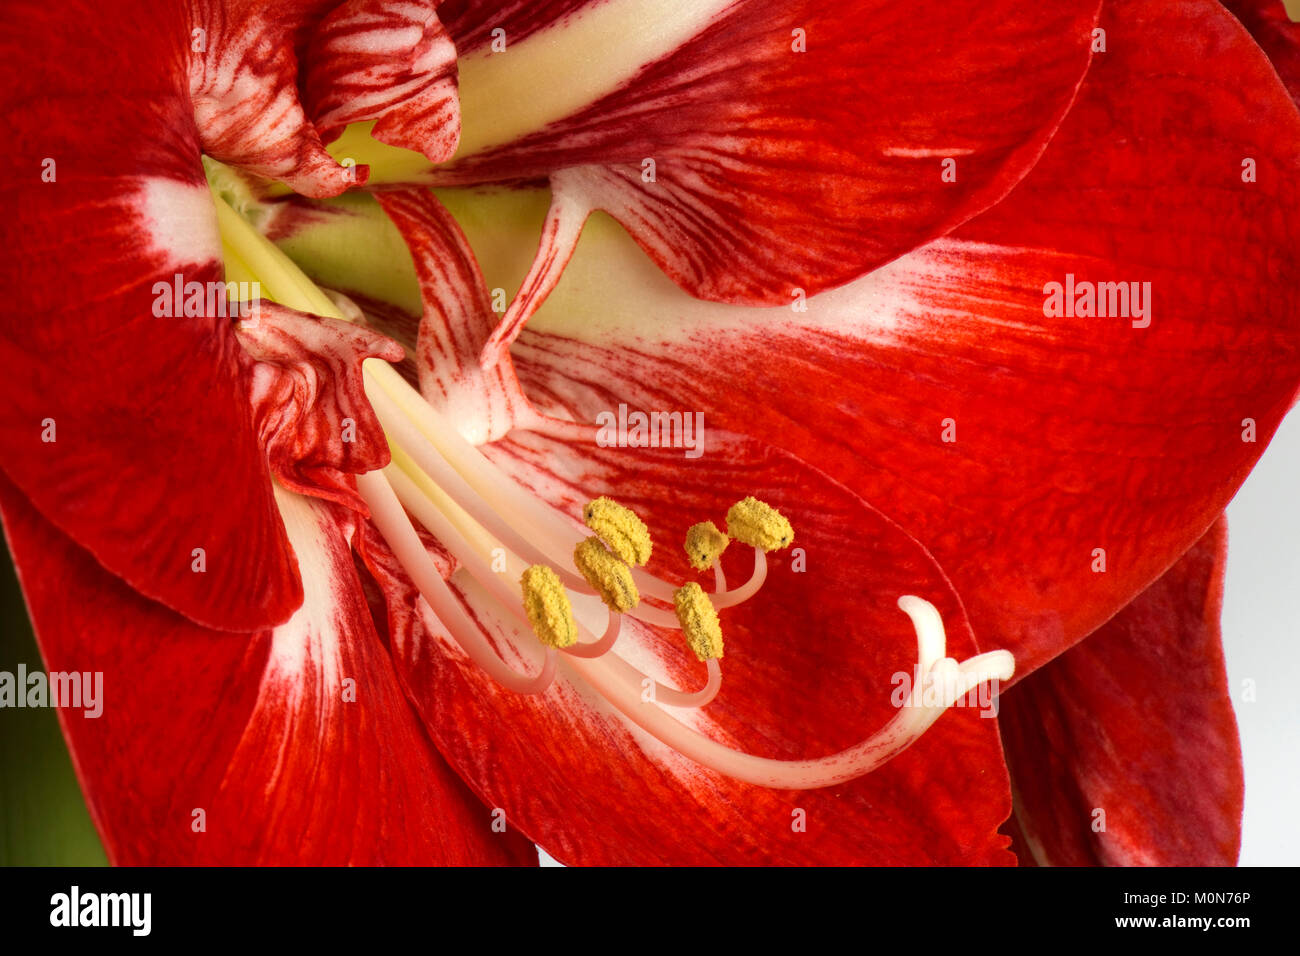 Red and white flowers from large bulb of Amaryllis Exotic striped Hippeastrum, at Christmas Stock Photo